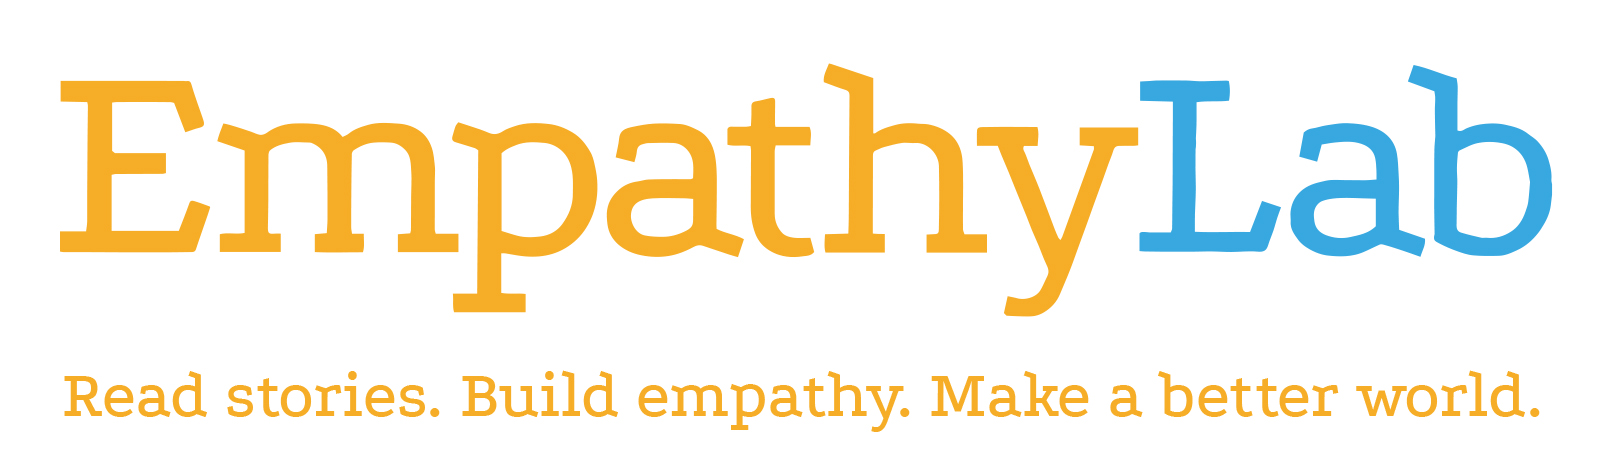 Primary Read for Empathy Collection 2022